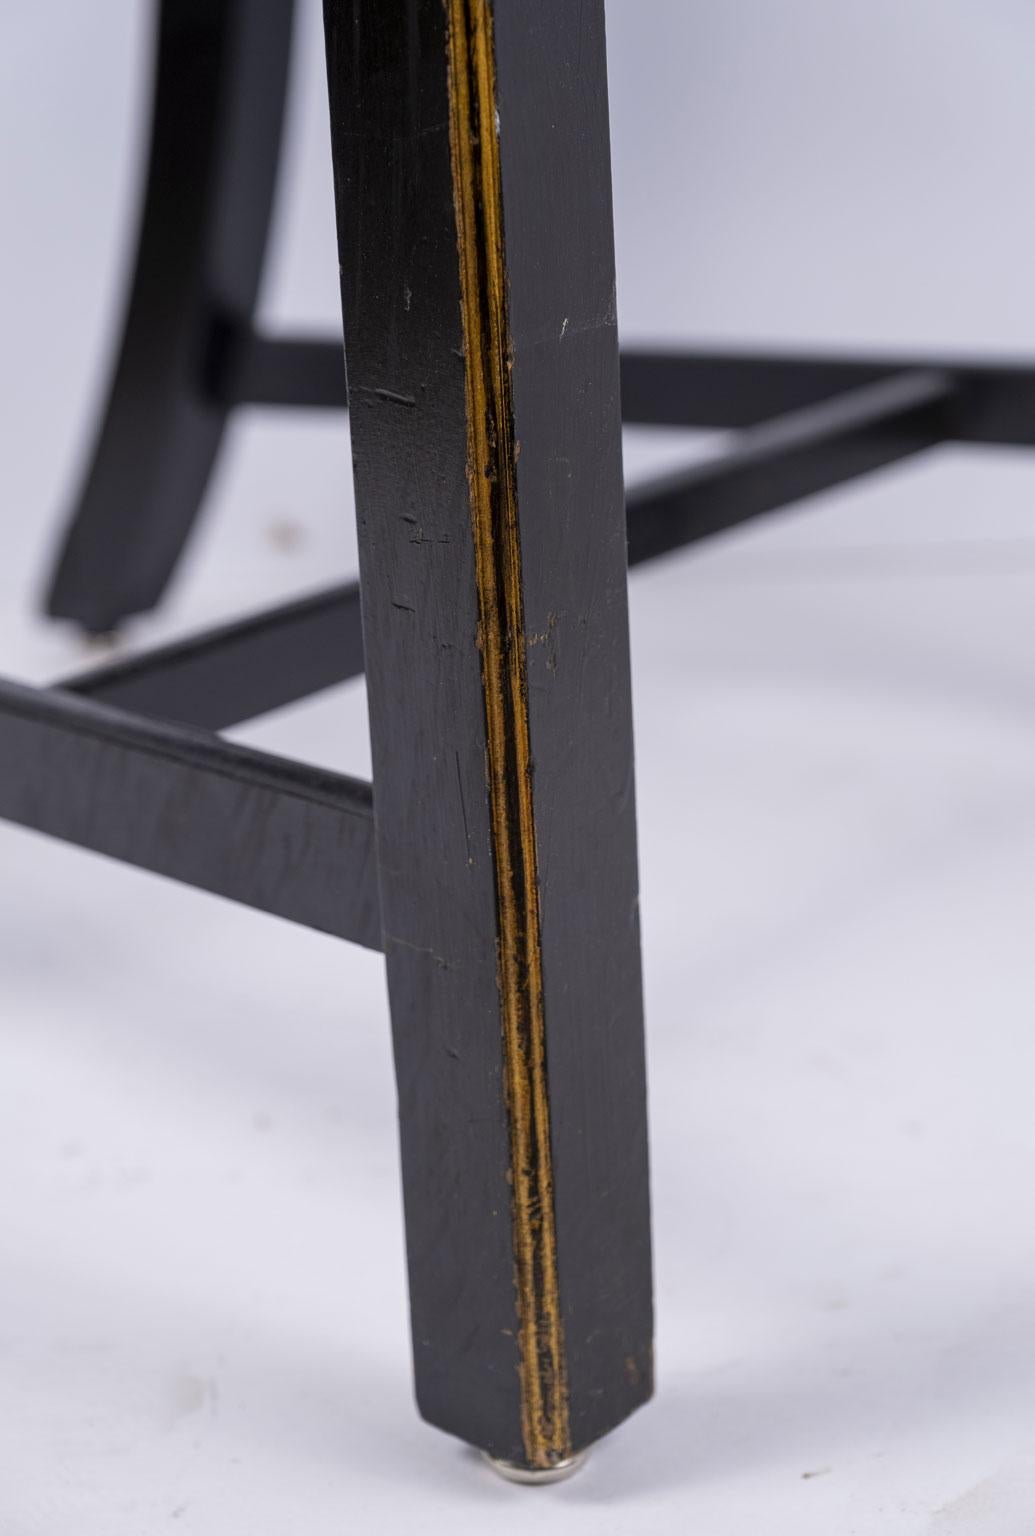 Ebonized and Gilded Portuguese Side Chair For Sale 5